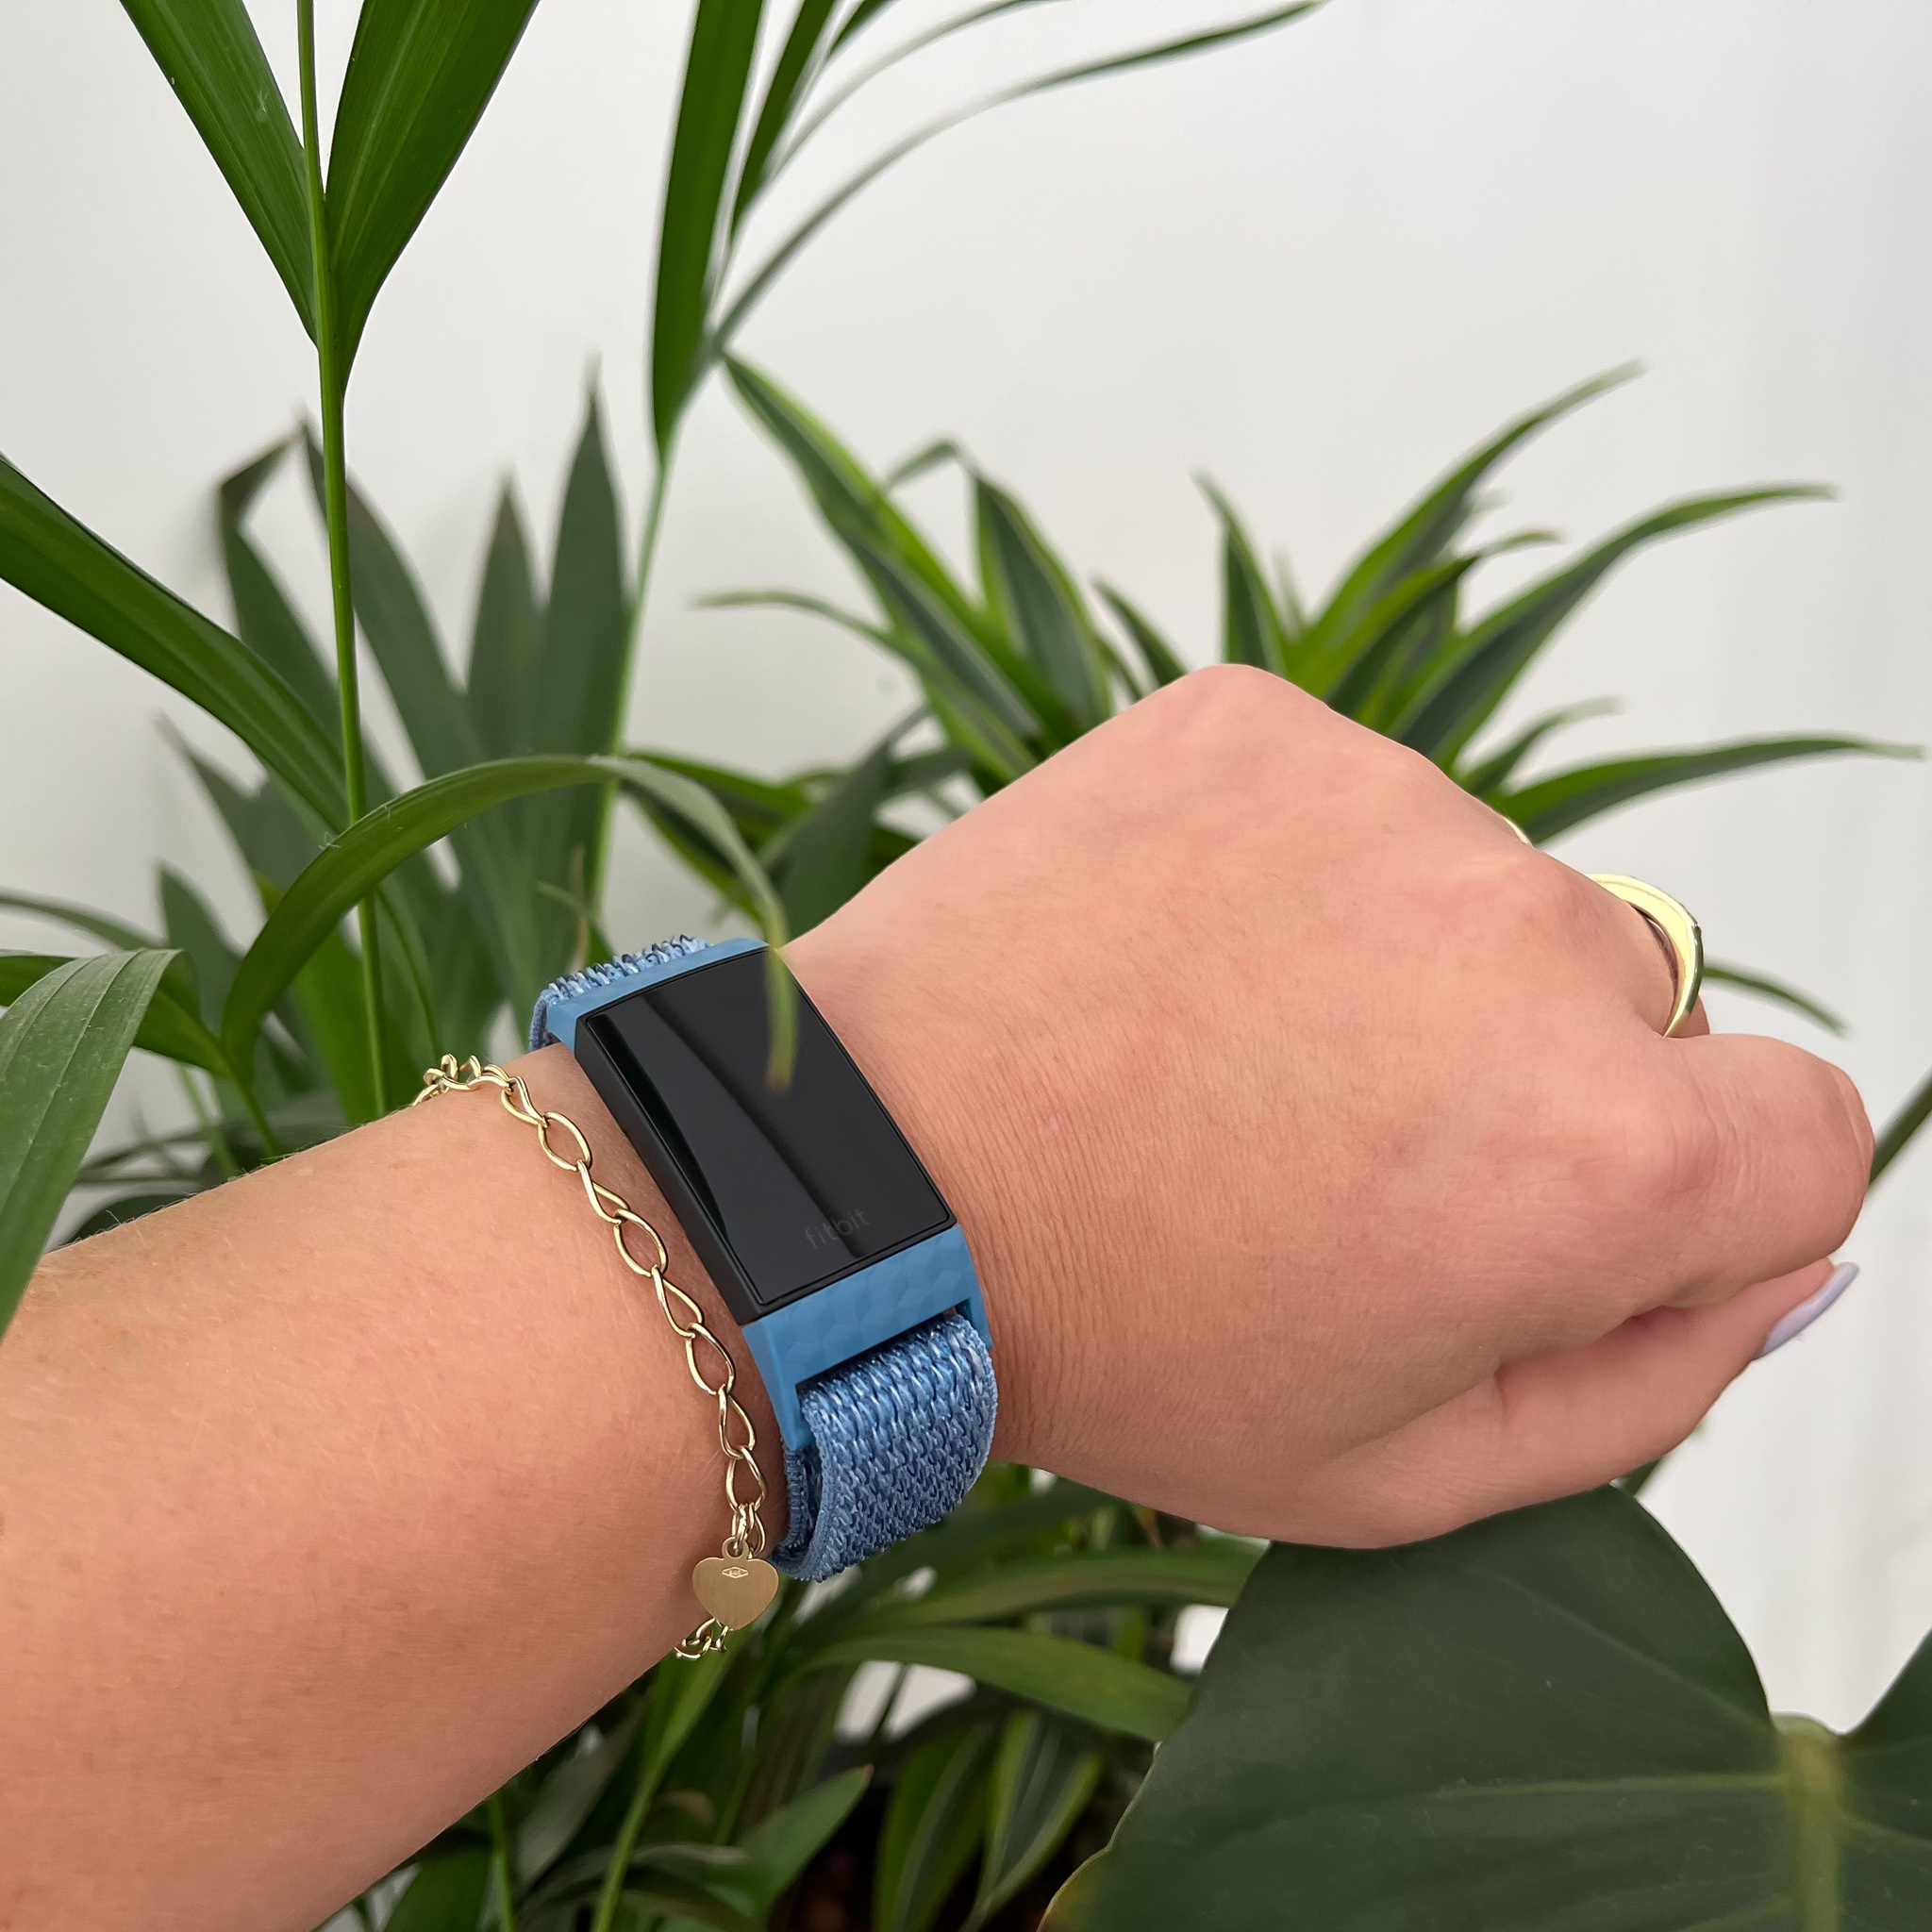 Fitbit Charge 3 & 4 nylon band - cape blauw